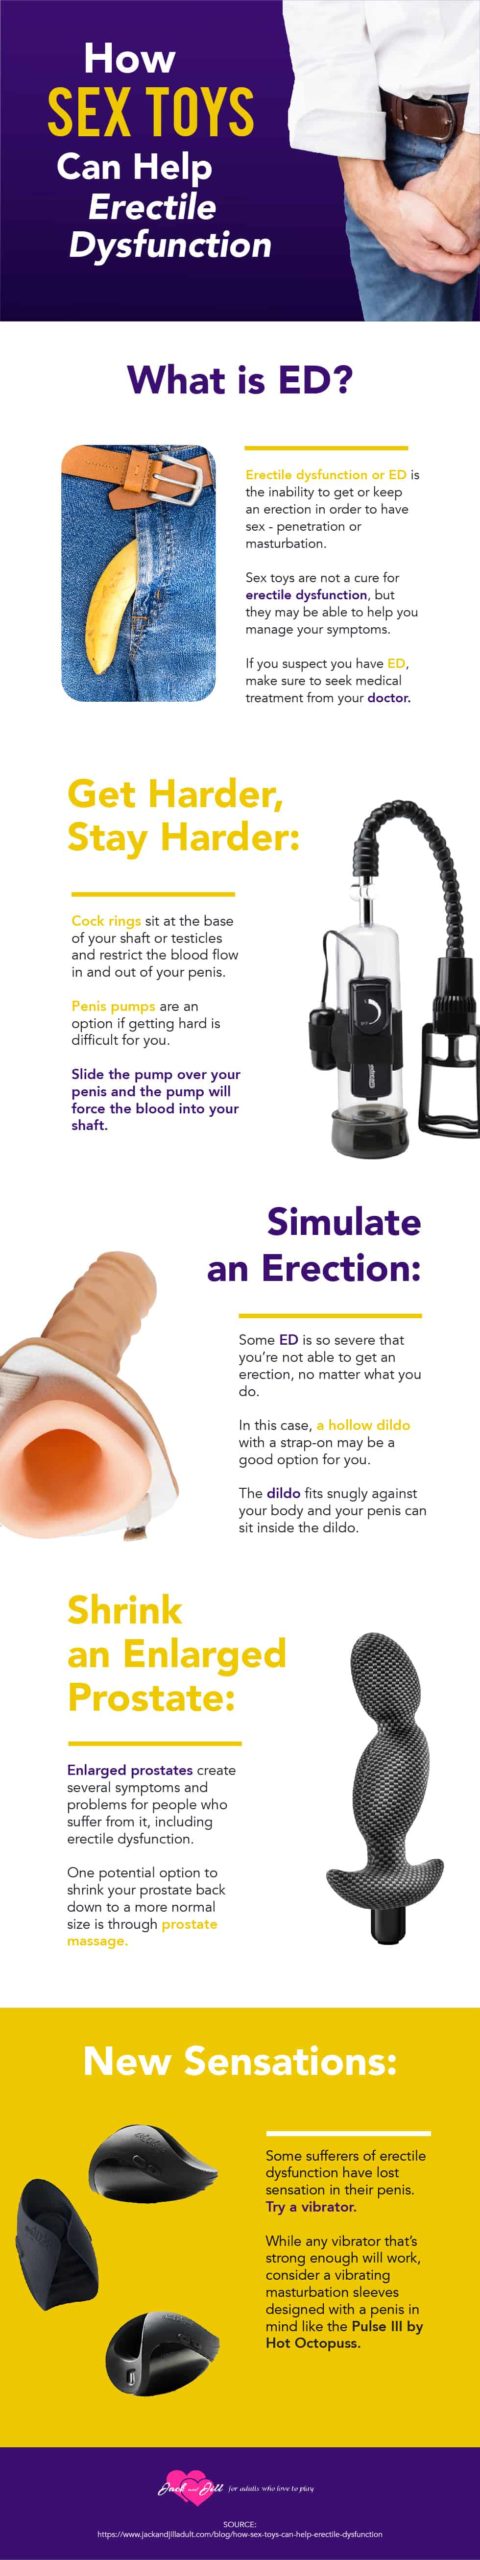 Infographic for How Sex Toys Can Help Erectile Dysfunction